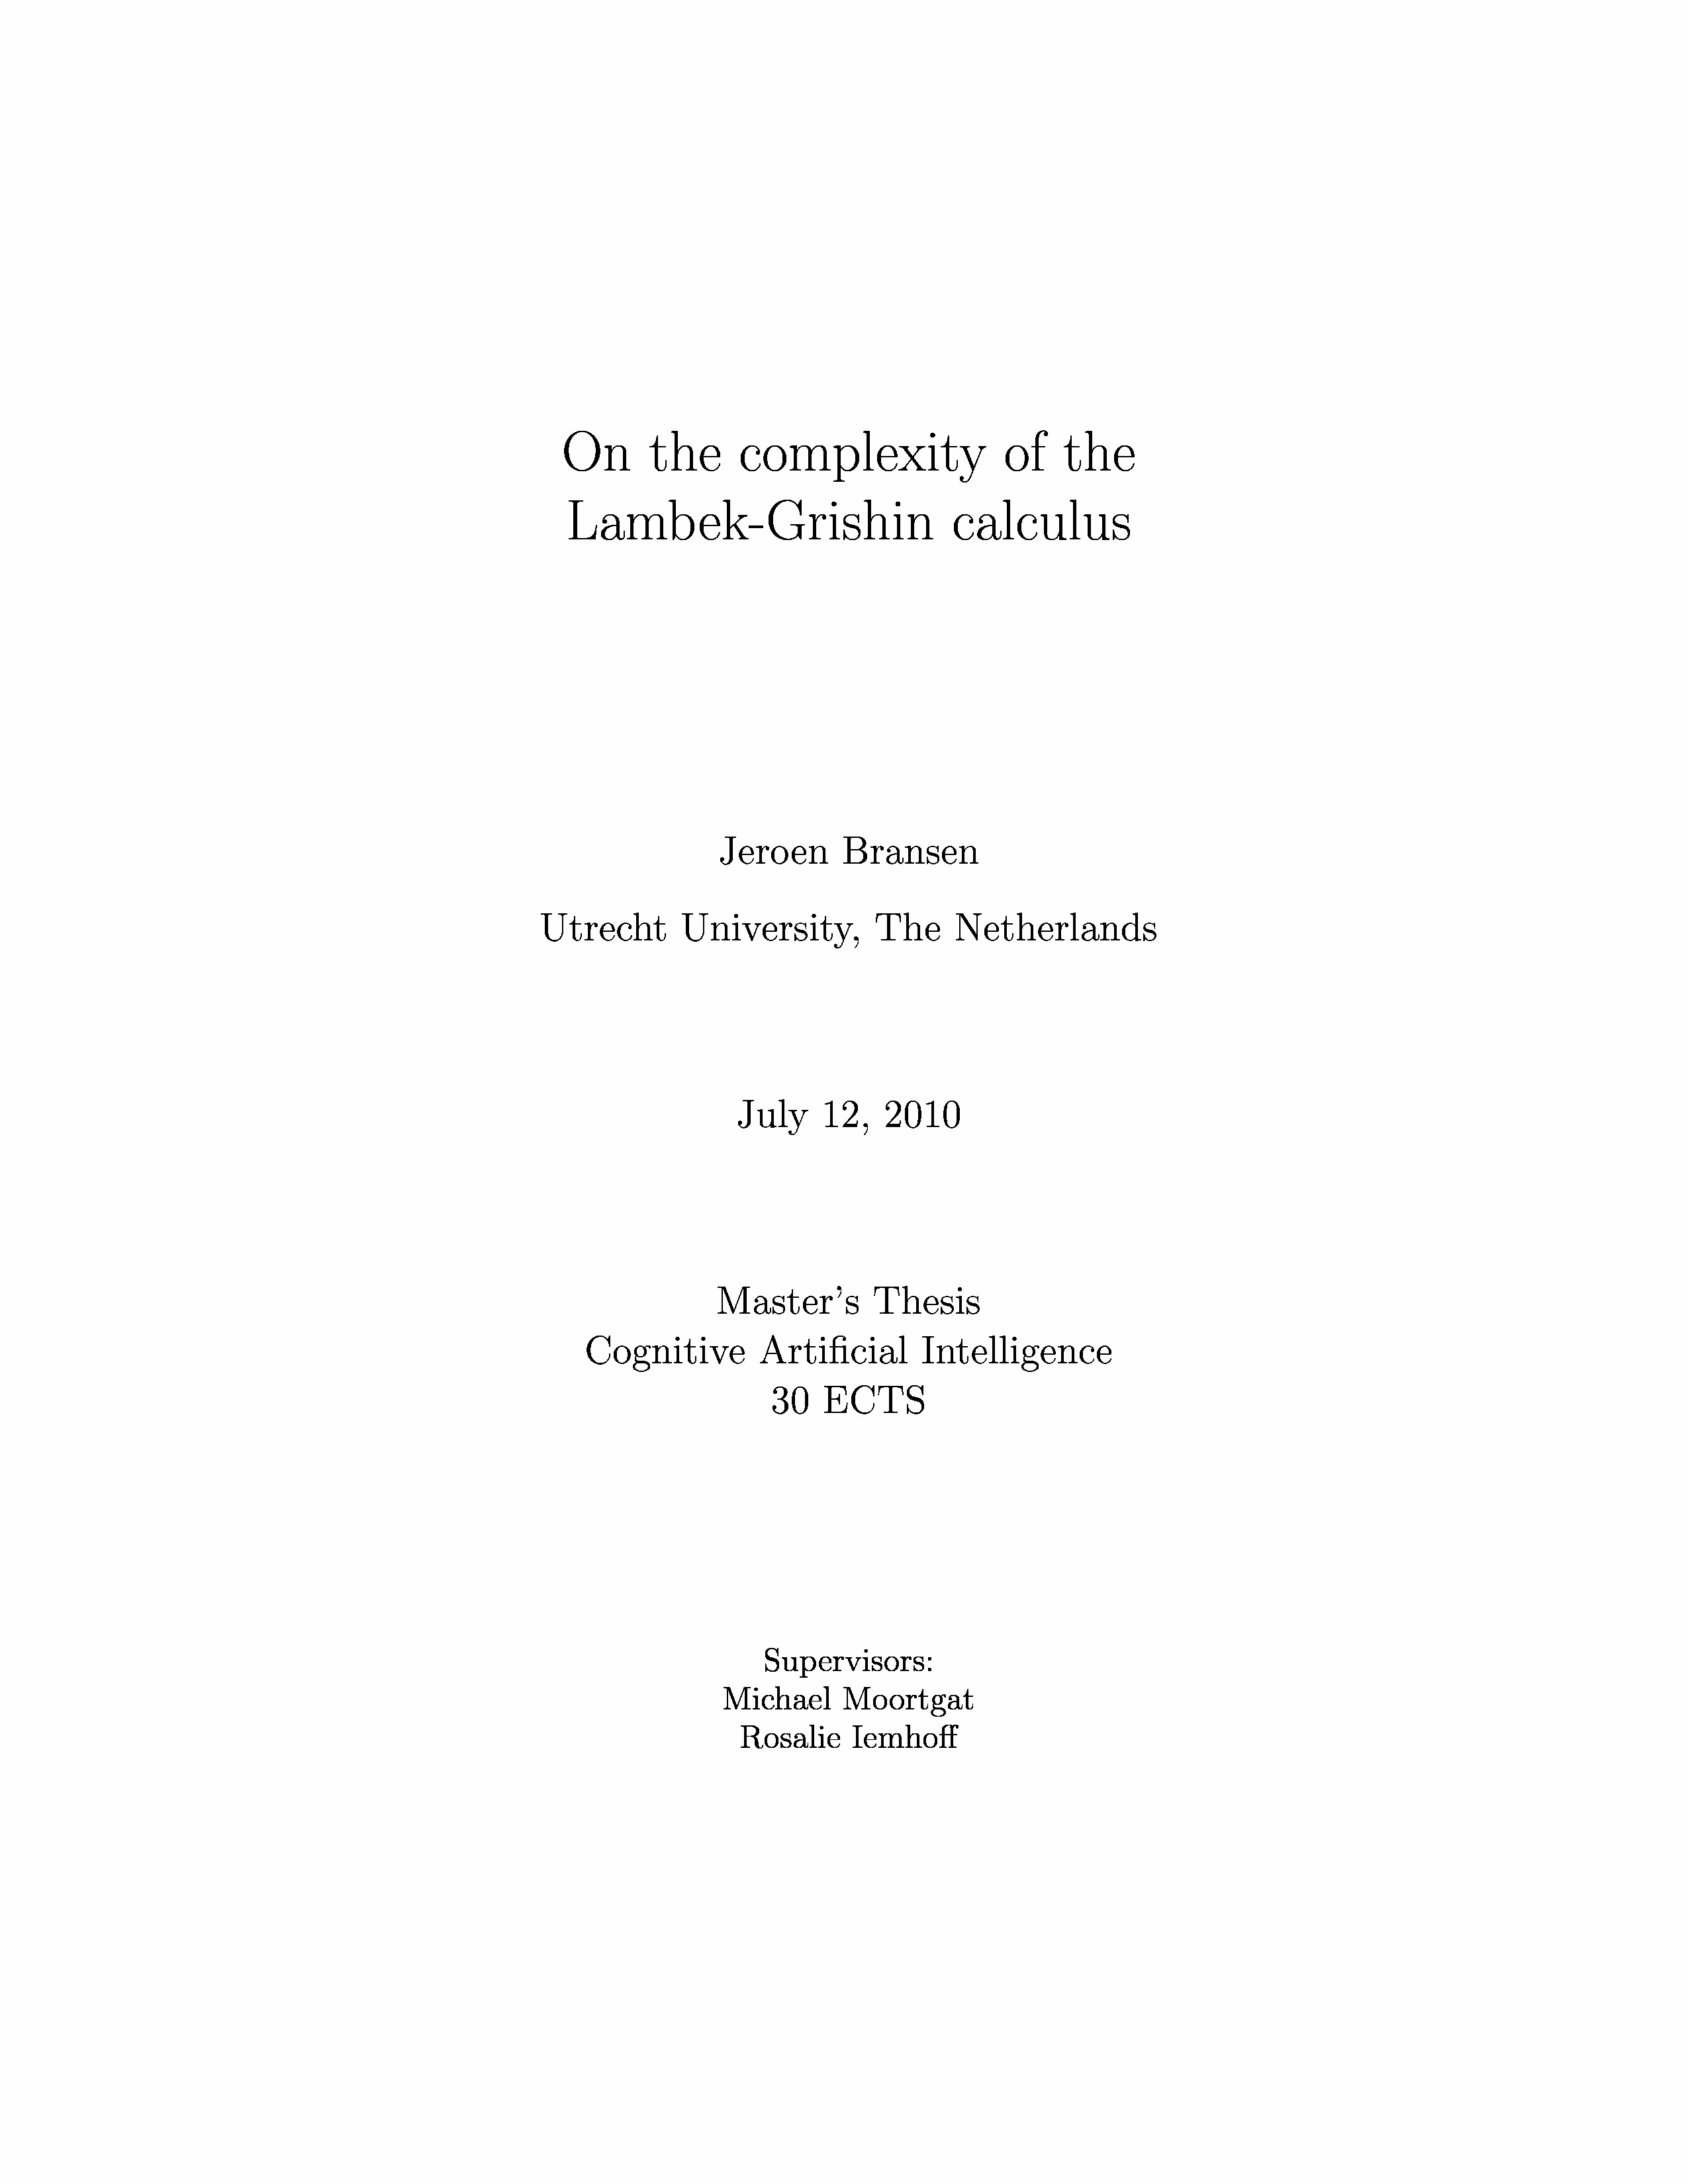 On the complexity of the Lambek-Grishin calculus